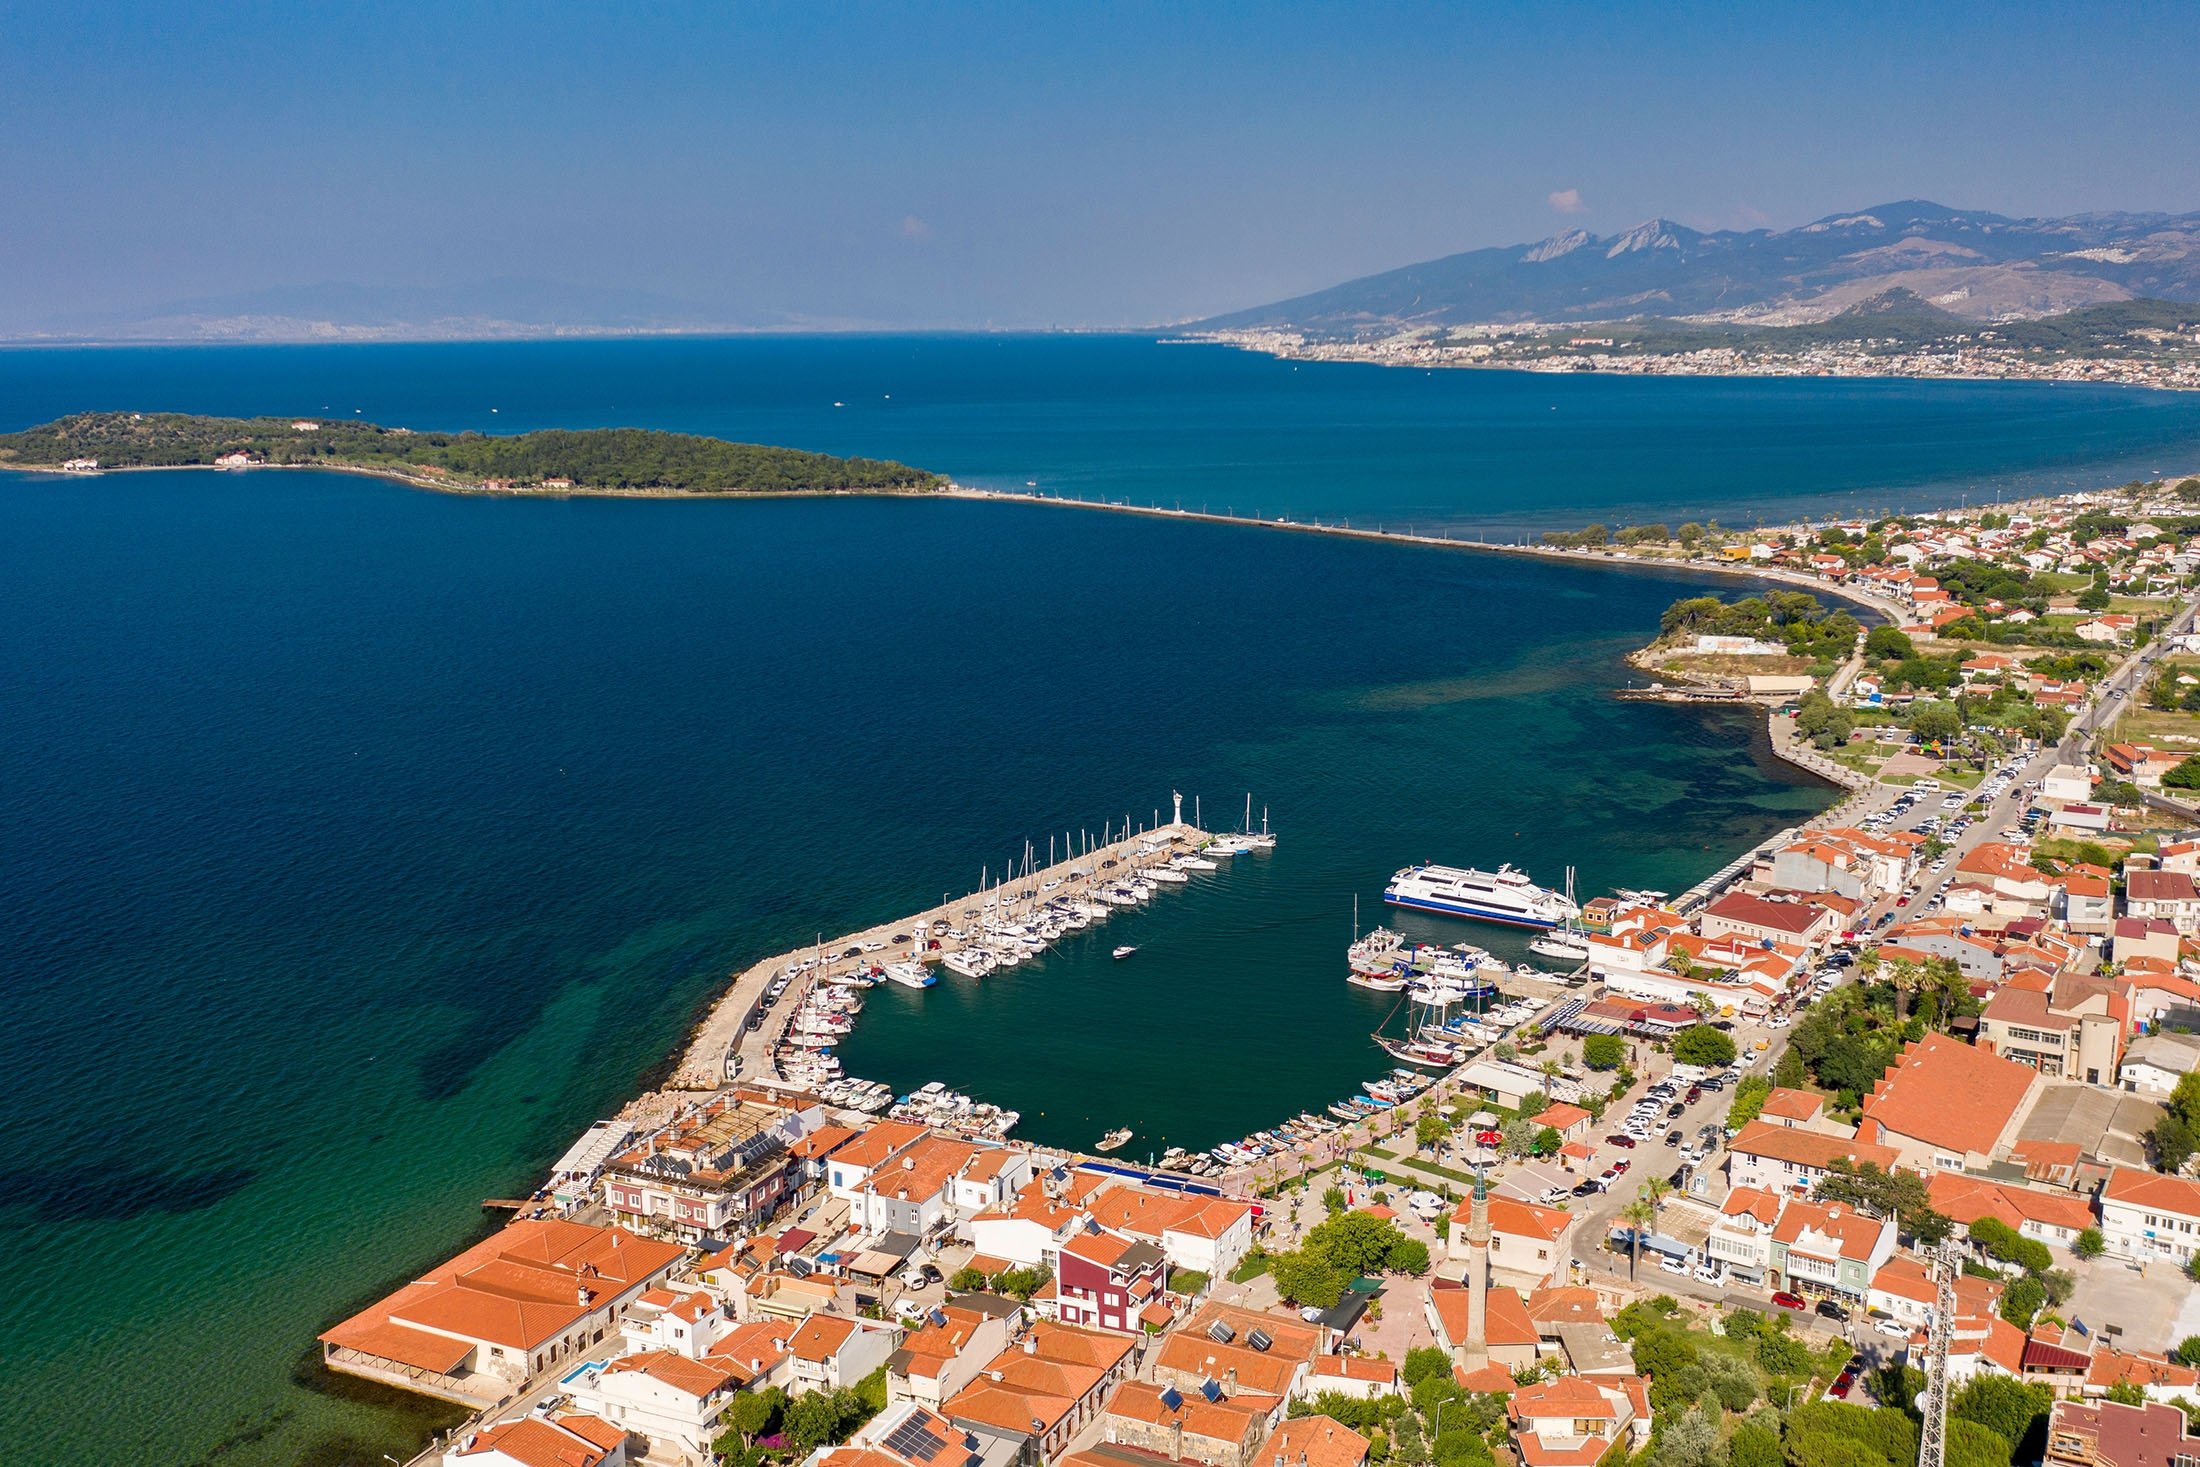 While Izmir's Urla is fast on the rise with a number of pleasantries such as upscale cafes and restaurants, the surrounding villages are completely hidden away into the wooded hills. (Shutterstock Photo)